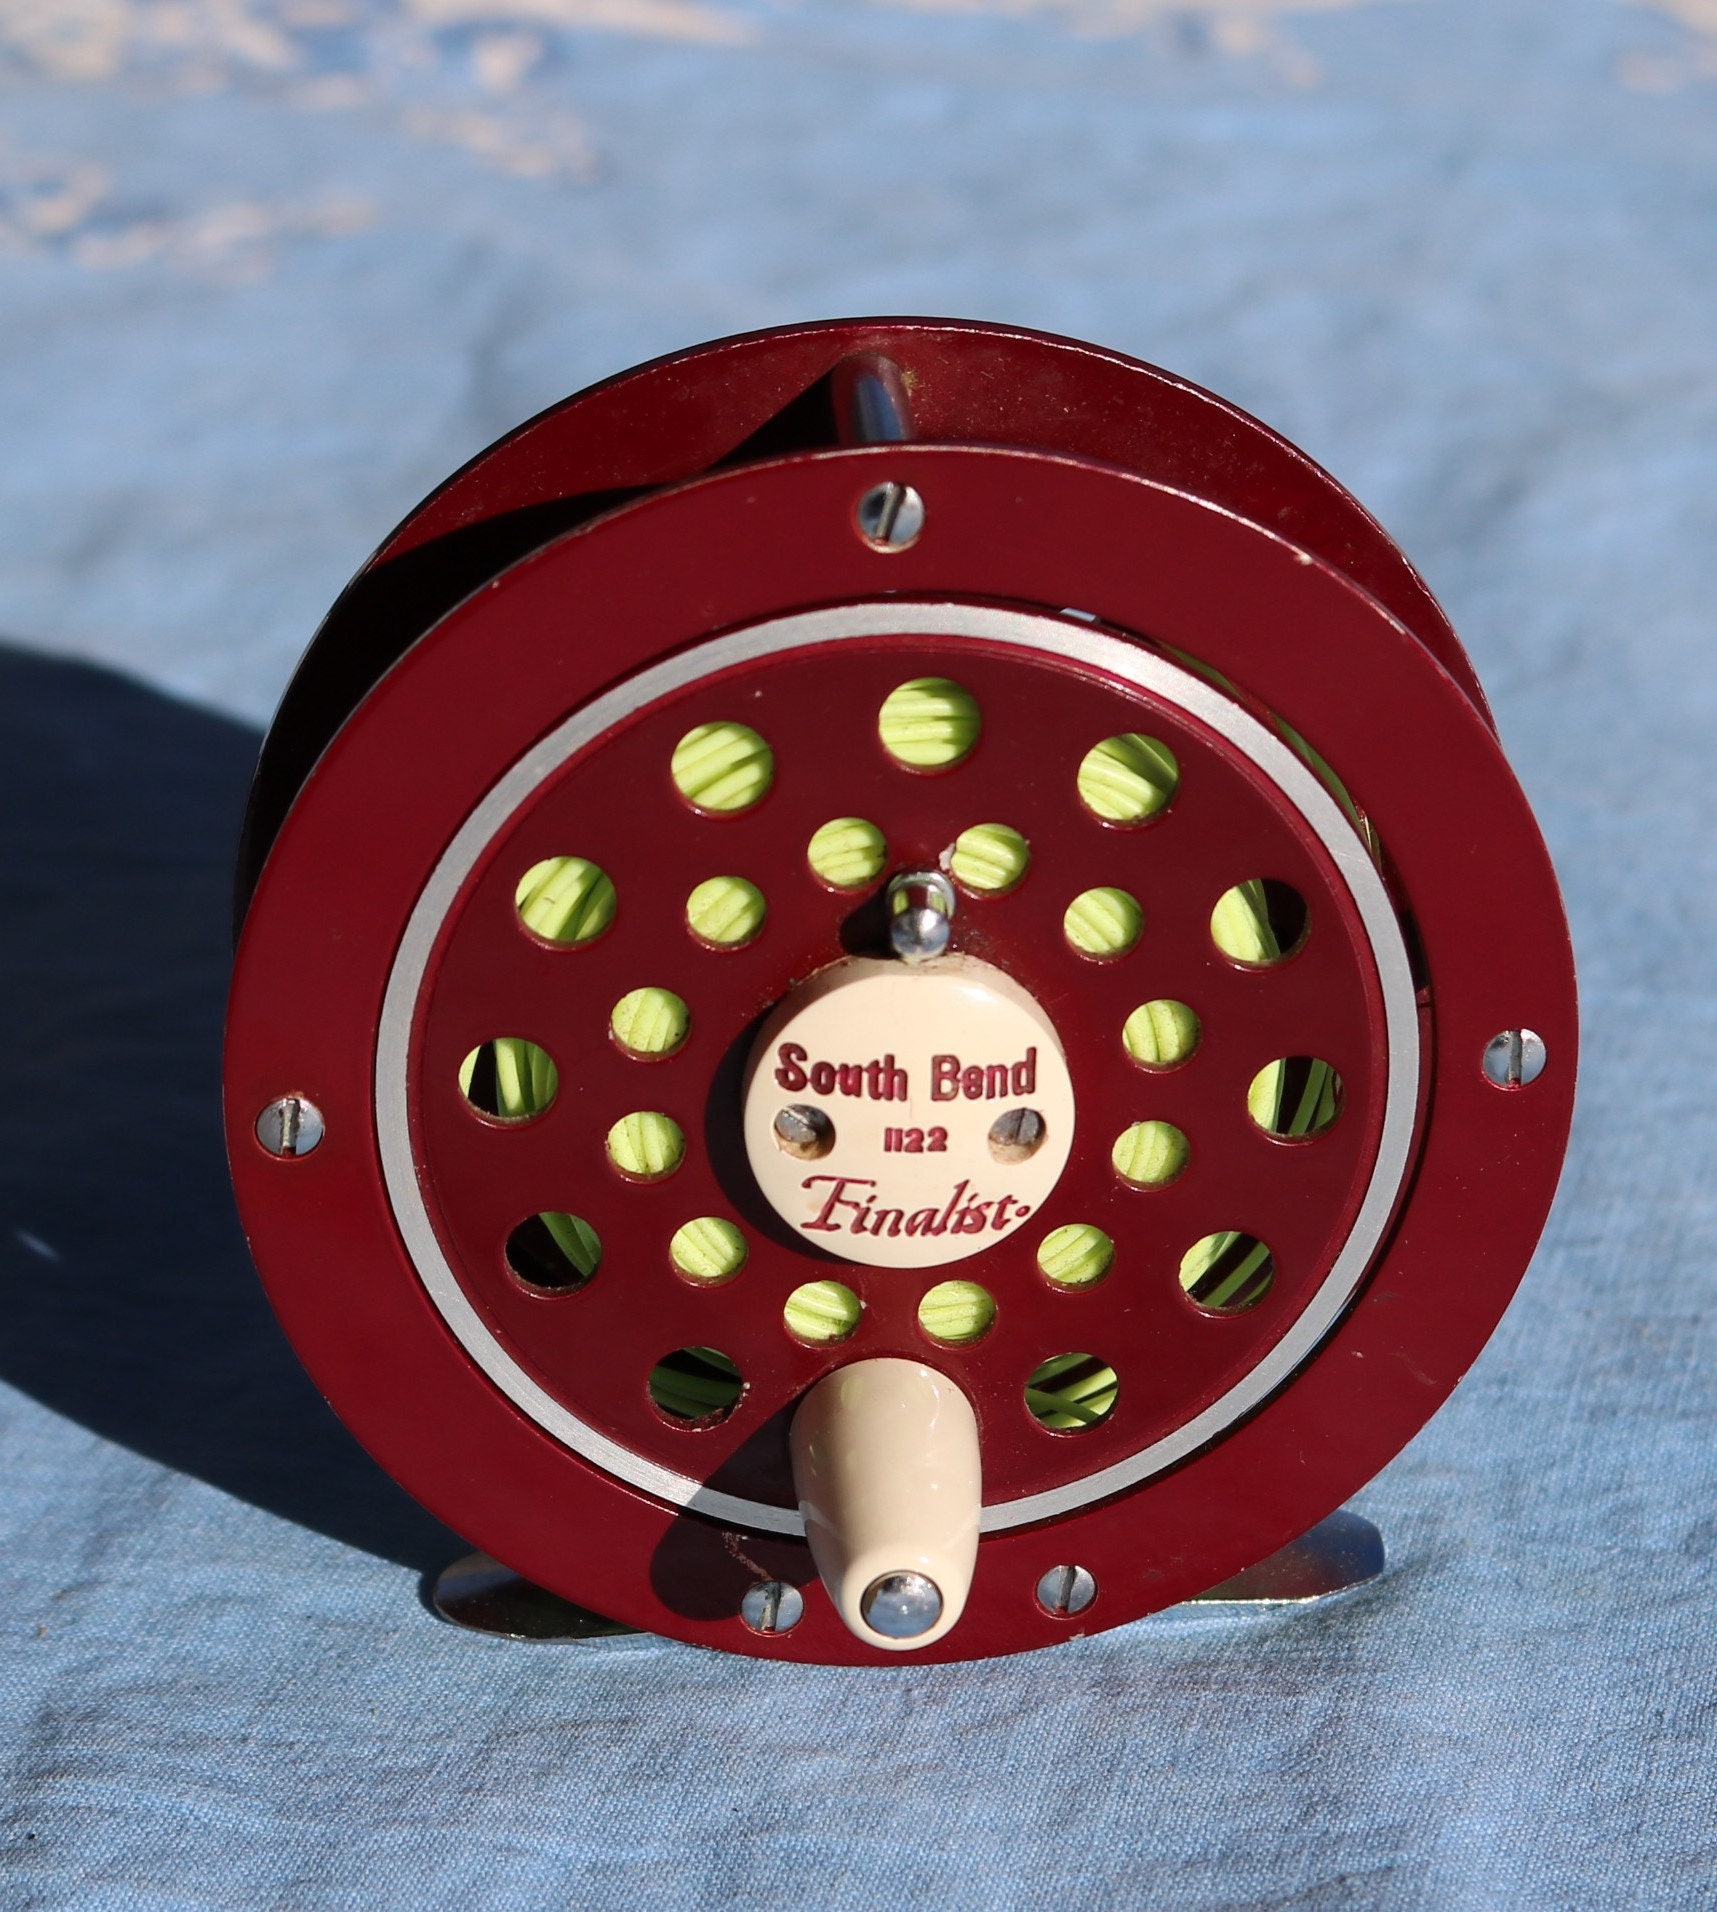 South Bend 1122finalist Fly Reel Complete With Almost New 4/5 Wt